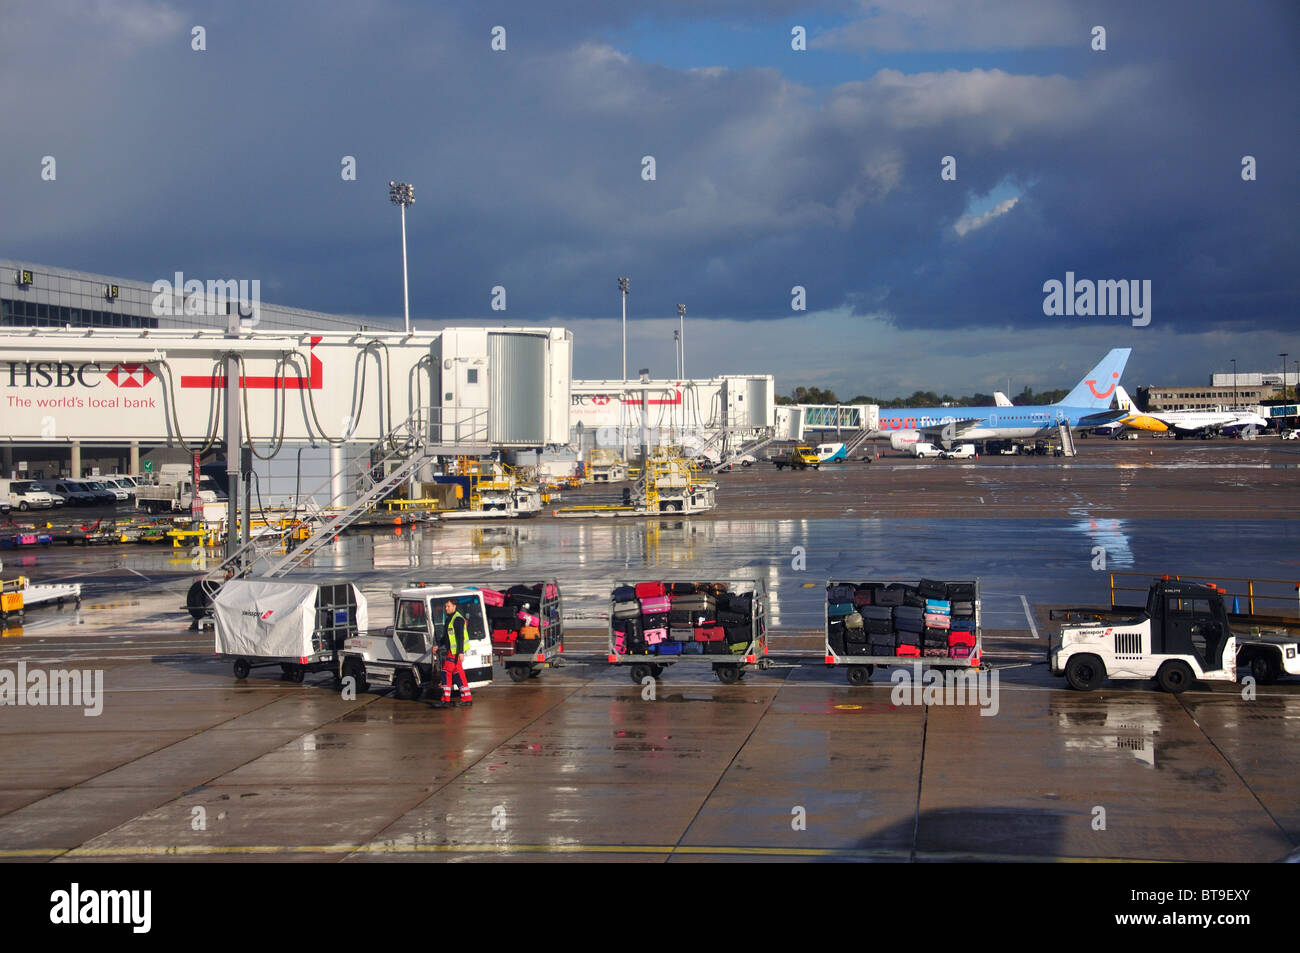 Luggage trollies on tarmac, Gatwick Airport, North Terminal, Gatwick Airport, Crawley, West Sussex, England, United Kingdom Stock Photo